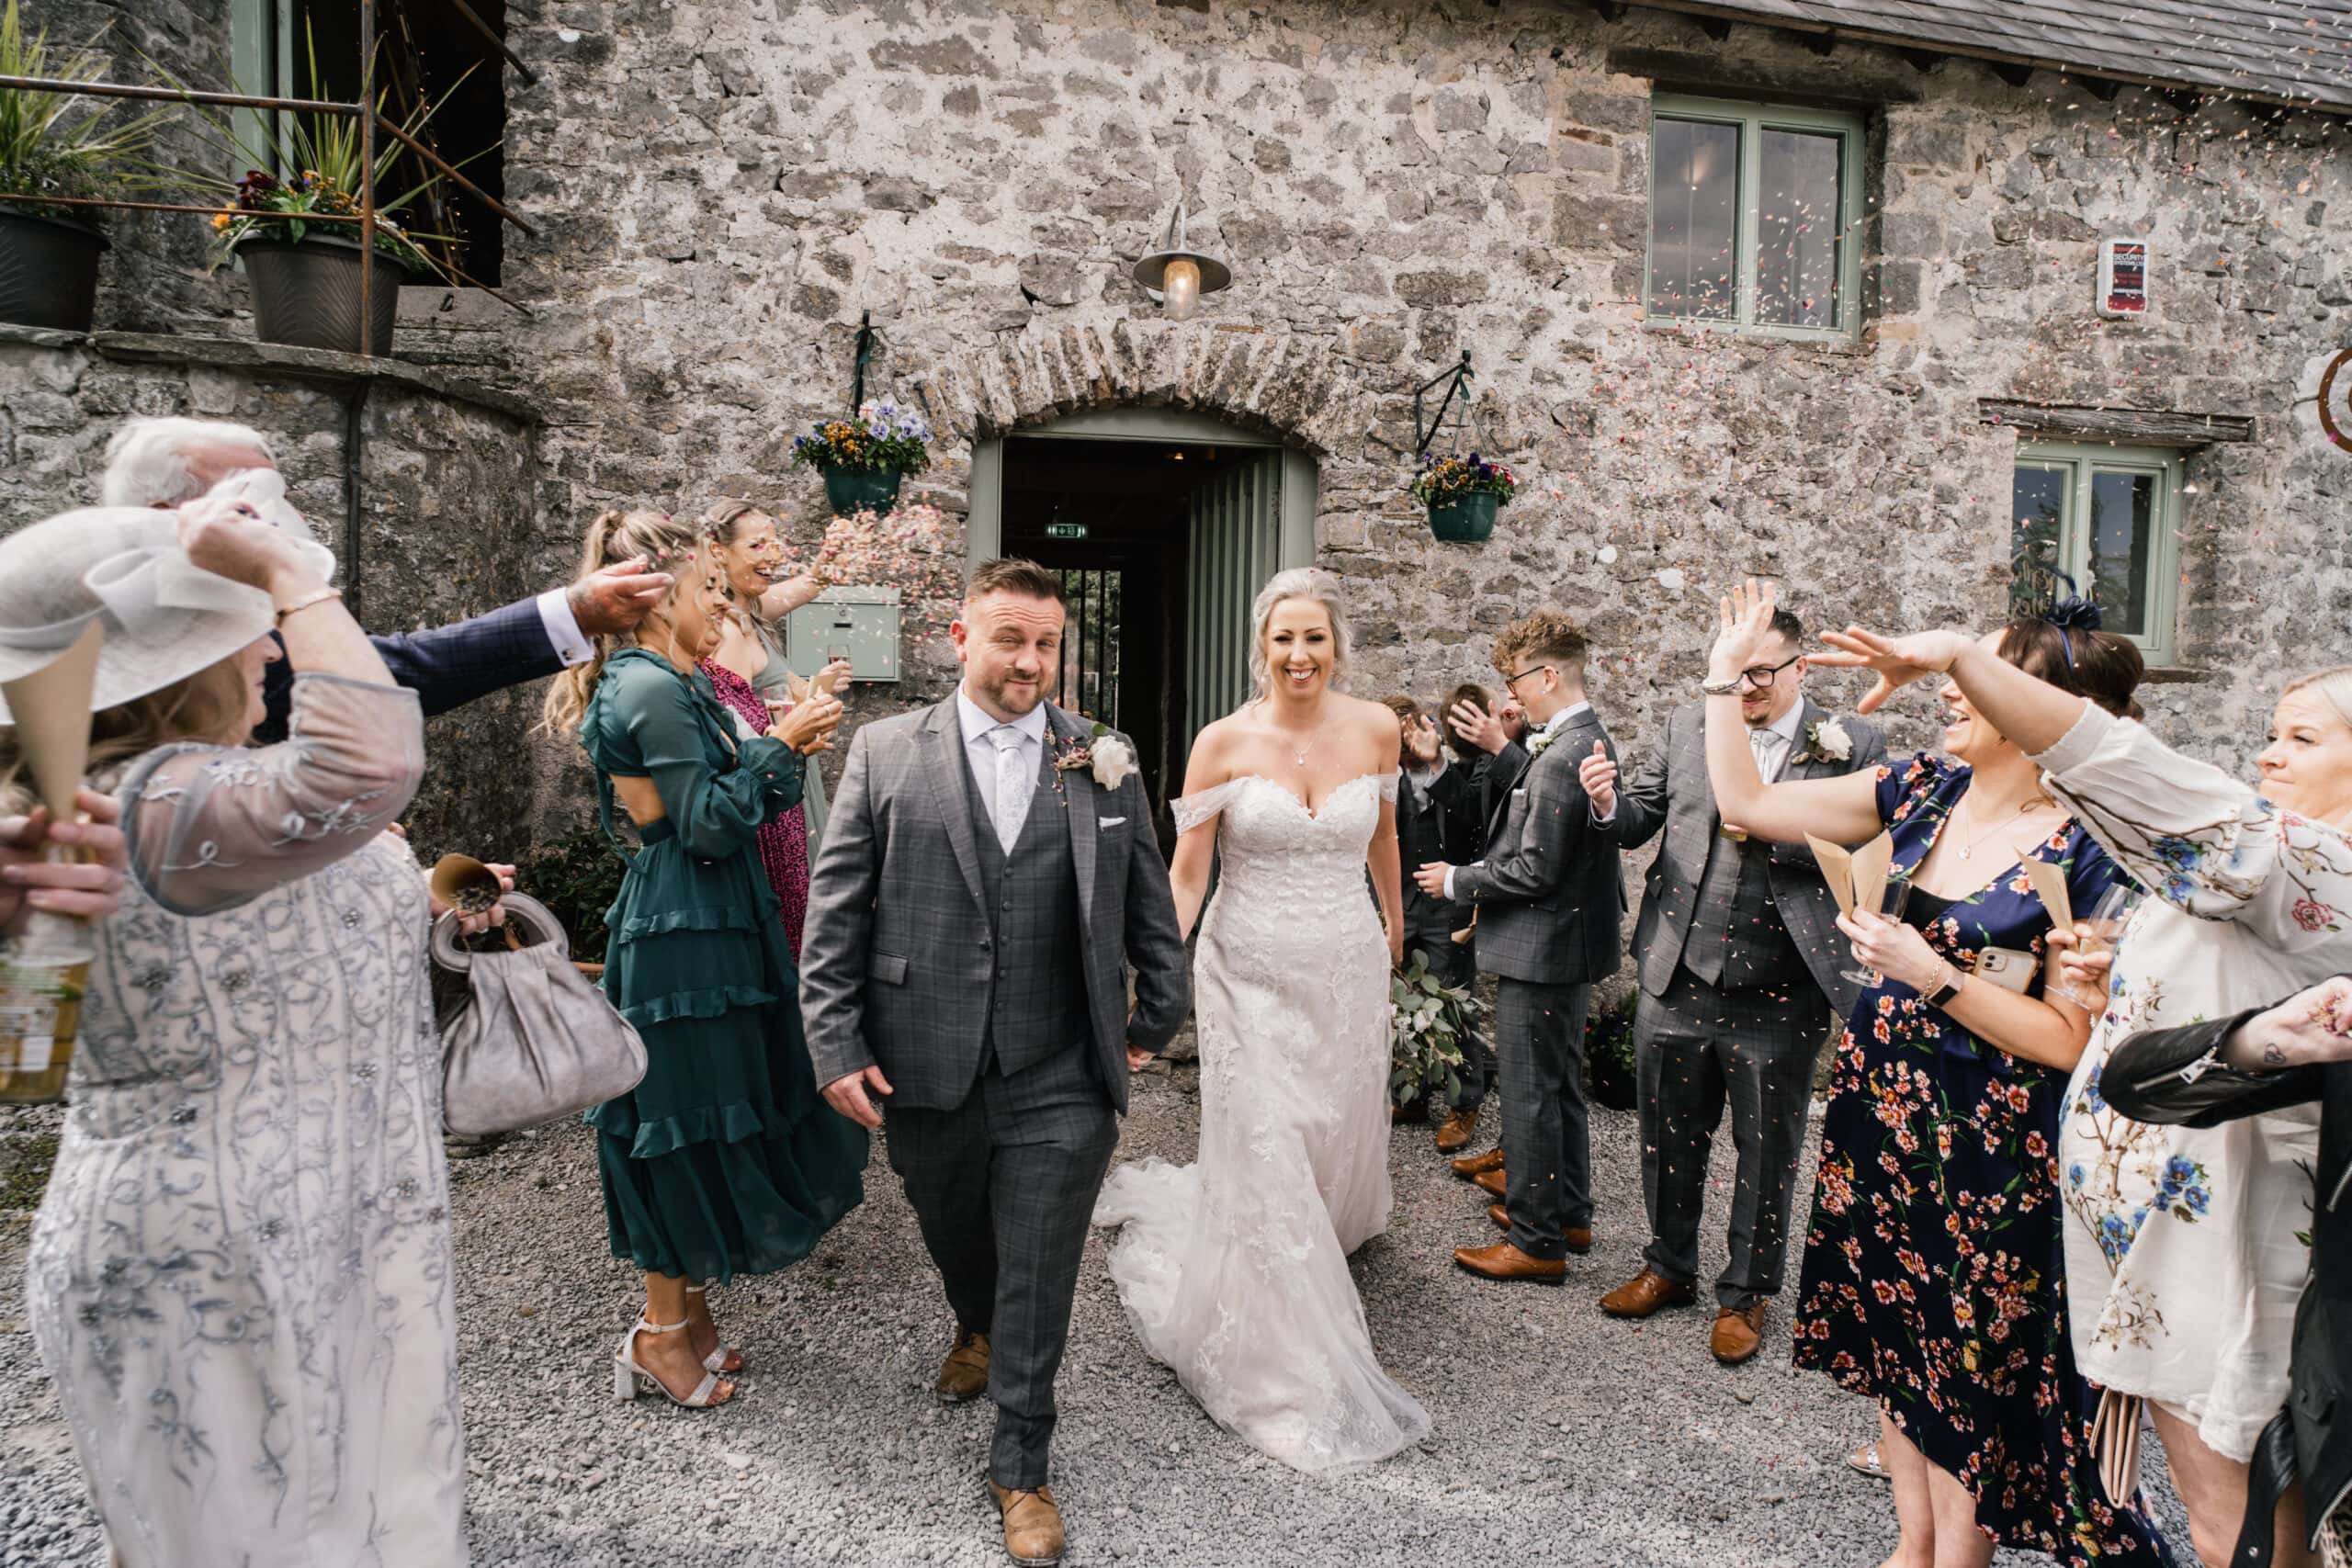 A joyful bride and groom exit a rustic stone building, smiling as guests line up on each side, tossing flower petals and raising glasses to celebrate.